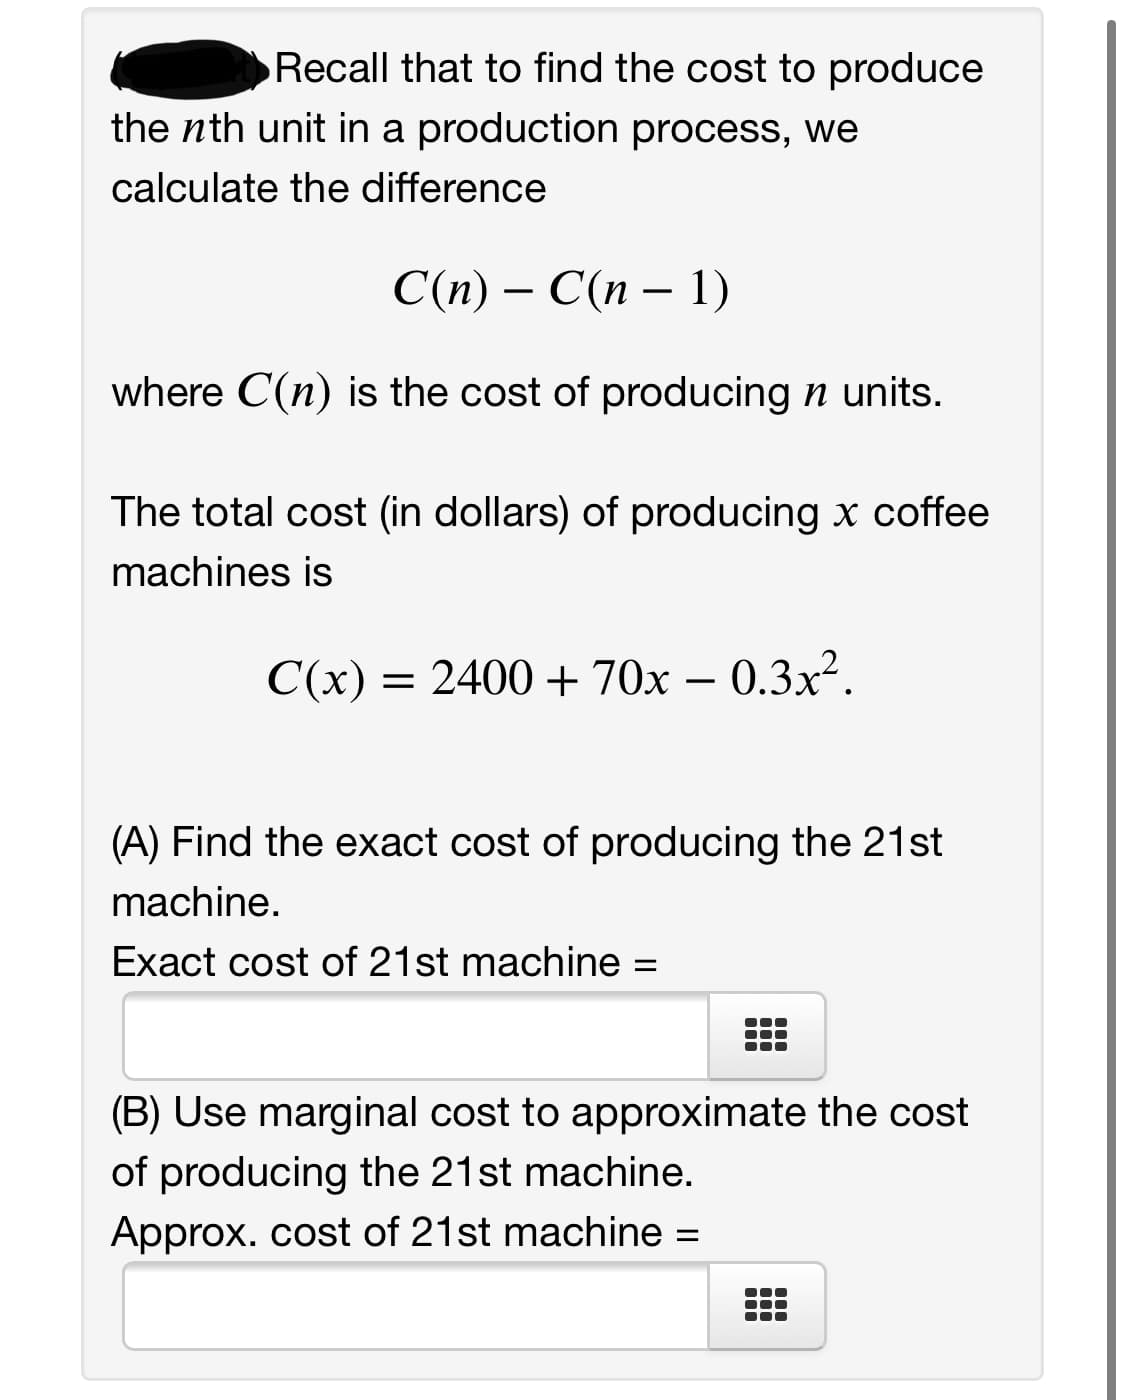 Recall that to find the cost to produce
the nth unit in a production process, we
calculate the difference
С(п) — С(п — 1)
where C(n) is the cost of producing n units.
The total cost (in dollars) of producing x coffee
machines is
C(x) = 2400 + 70x – 0.3x².
-
(A) Find the exact cost of producing the 21st
machine.
Exact cost of 21st machine =
(B) Use marginal cost to approximate the cost
of producing the 21st machine.
Approx. cost of 21st machine =
